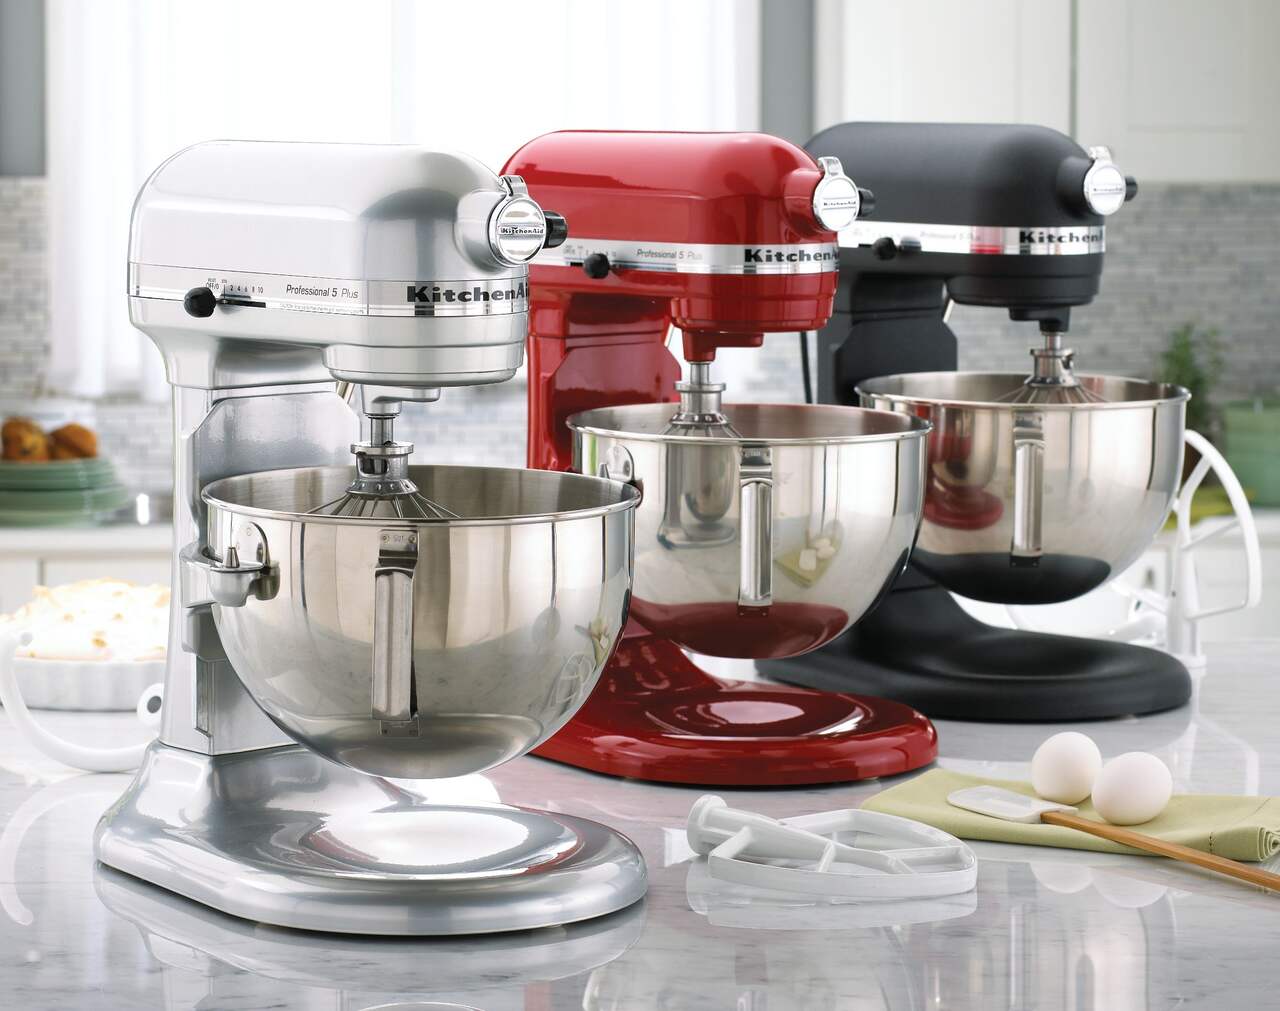 https://media-www.canadiantire.ca/product/living/kitchen/kitchen-appliances/0432170/kitchen-aid-pro-stand-mixer-metallic-chrome-b33eb1c5-f0d9-4d76-9fad-244fc0a5d373-jpgrendition.jpg?imdensity=1&imwidth=1244&impolicy=mZoom